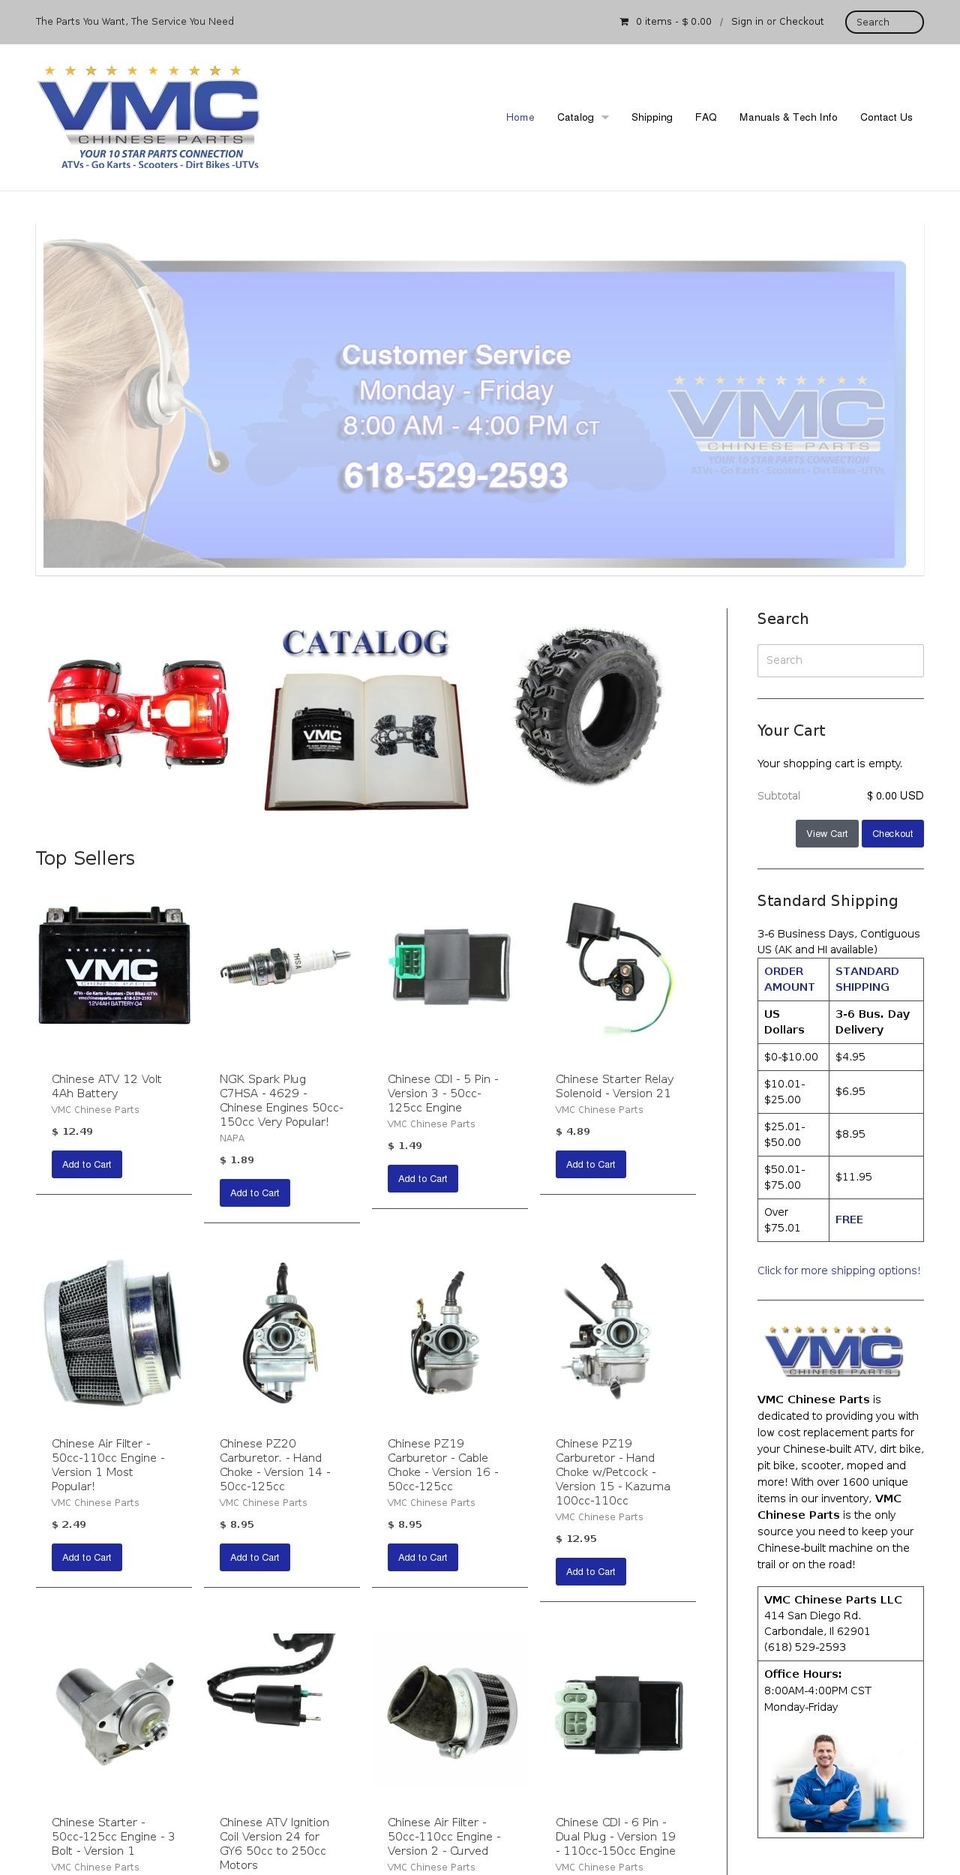 Providence Shopify theme site example vmcchineseparts.com